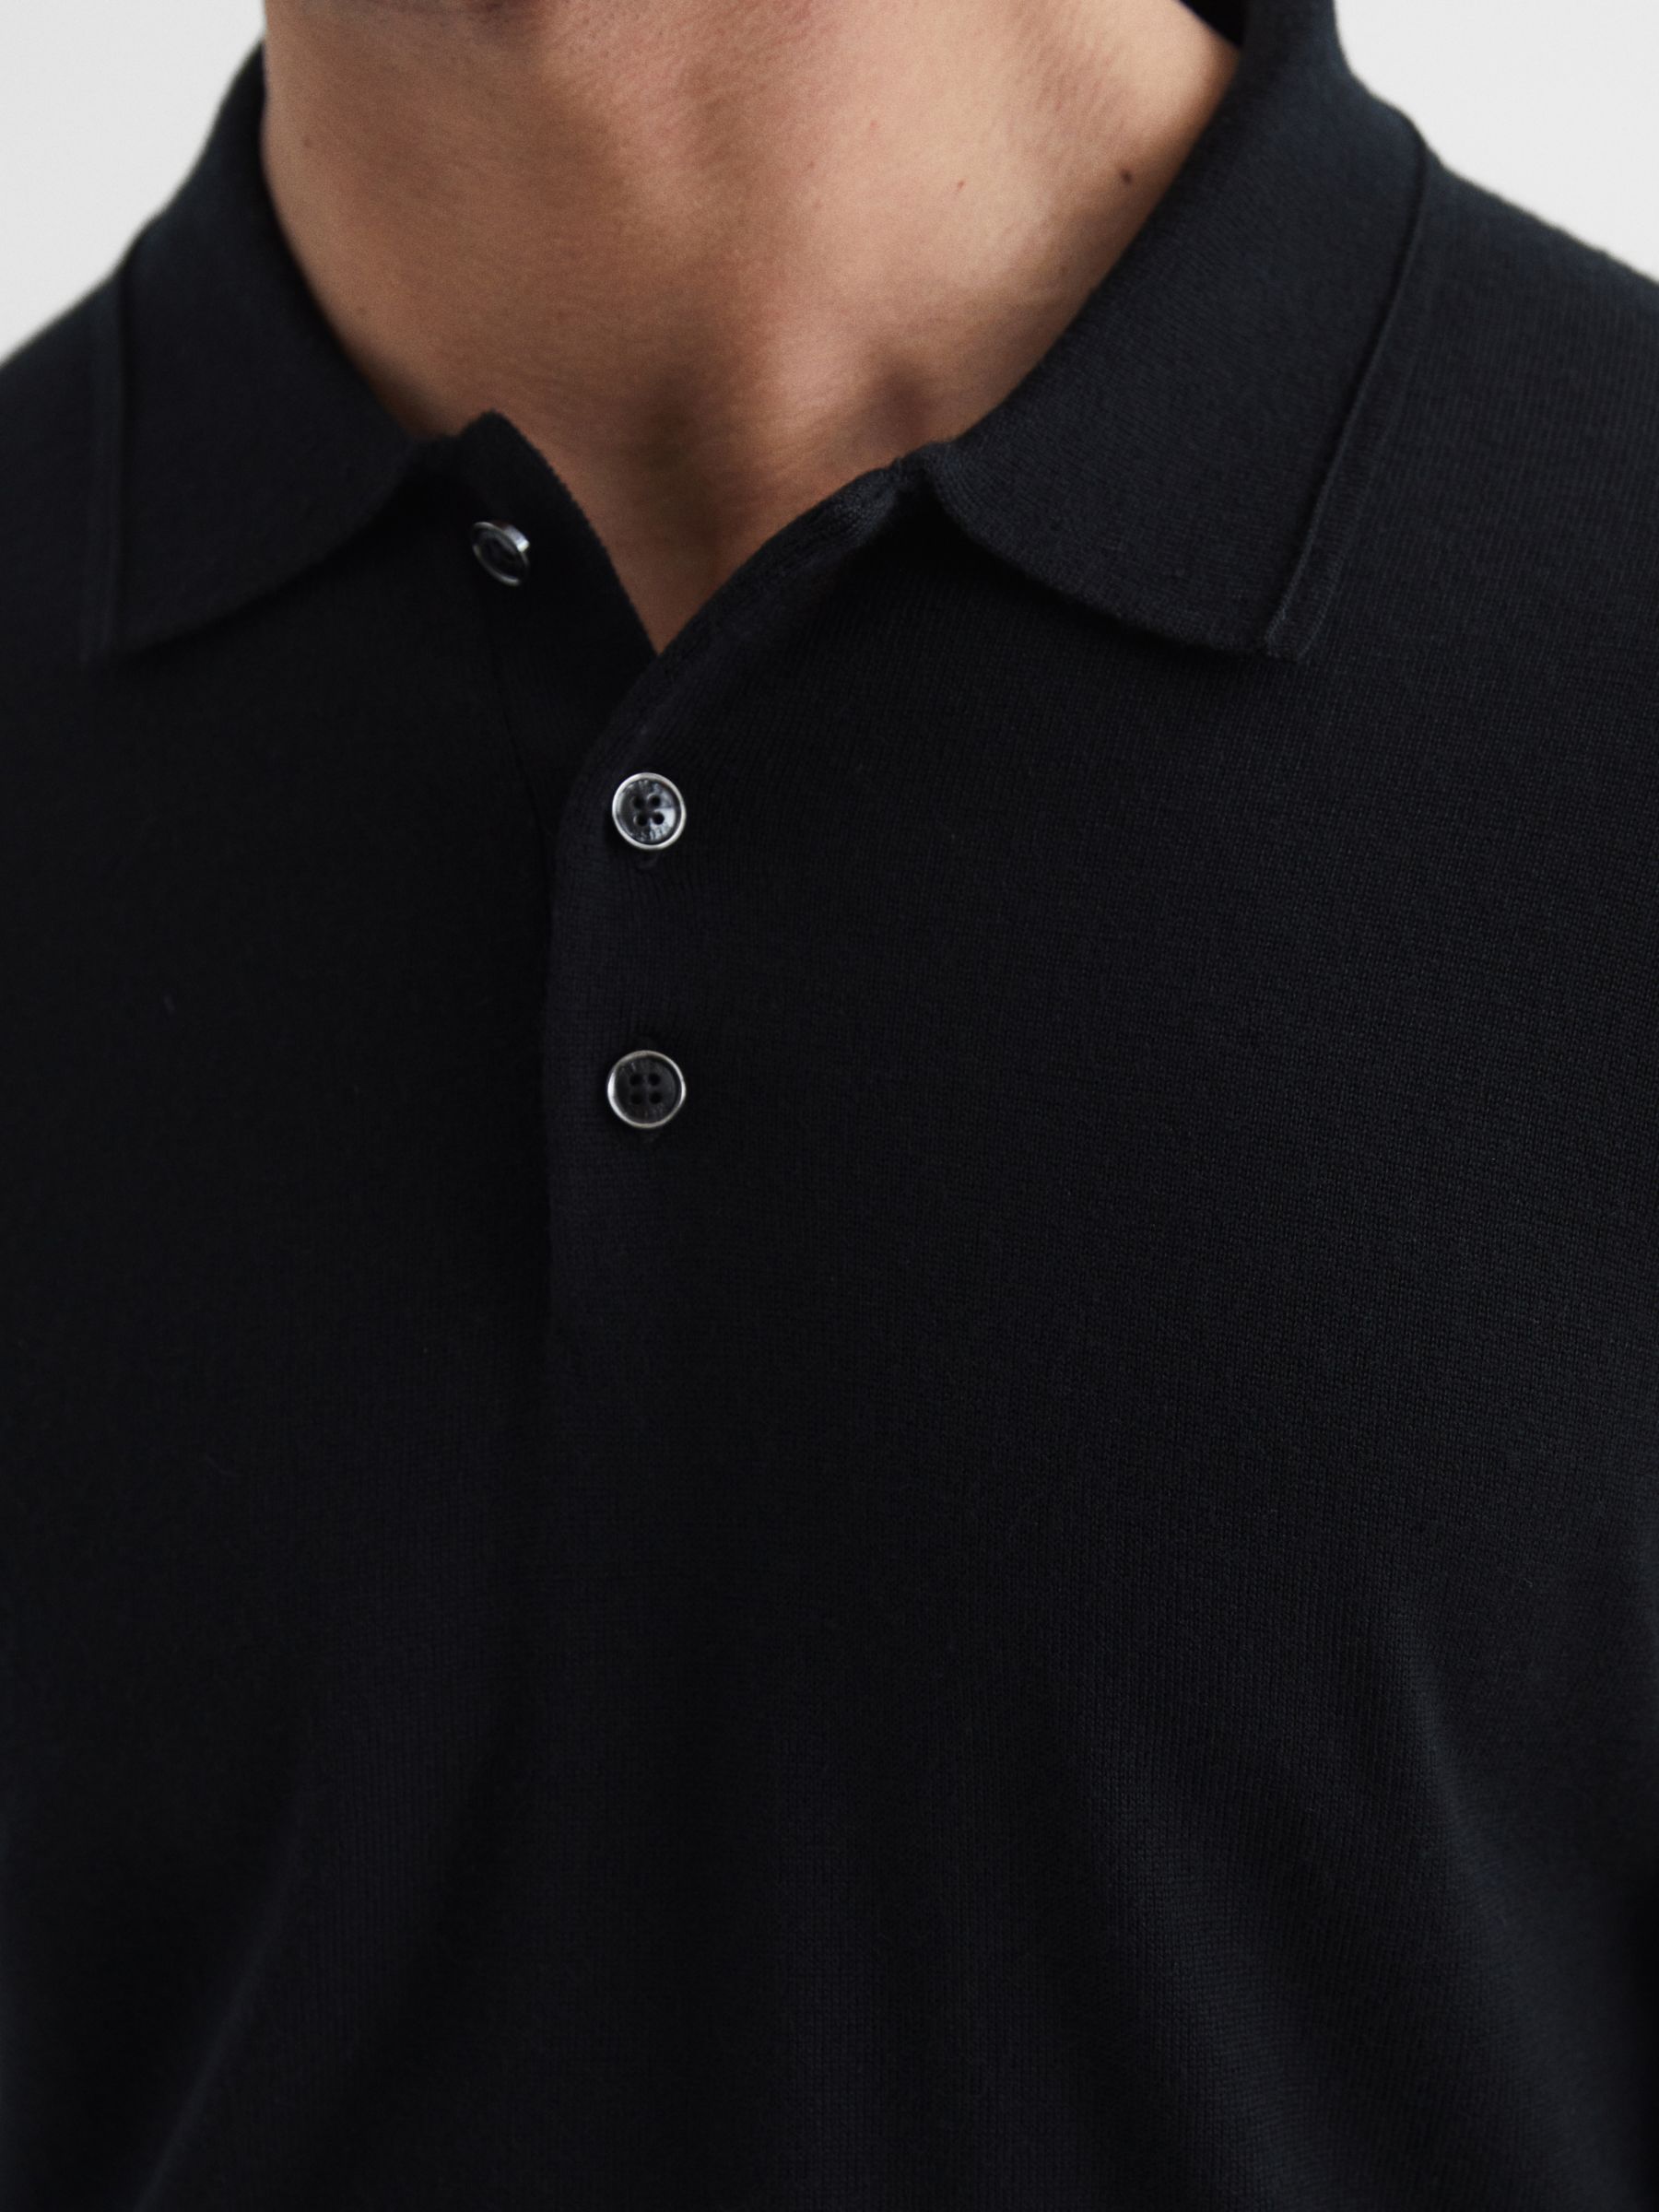 Buy Reiss Trafford Knitted Wool Long Sleeve Polo Top Online at johnlewis.com